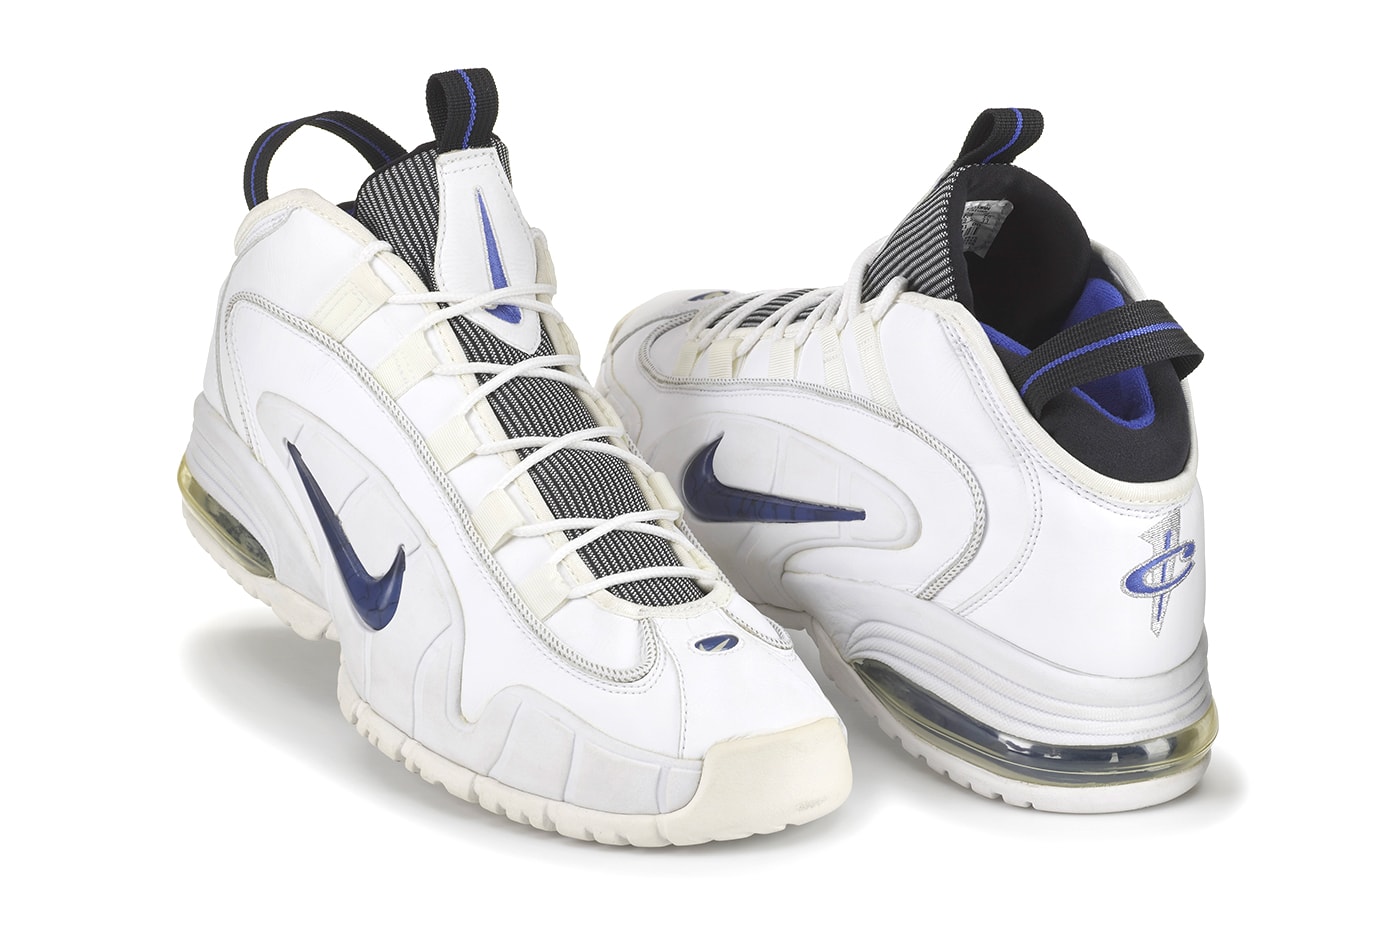 Nike Air Max Penny 1 "Home"